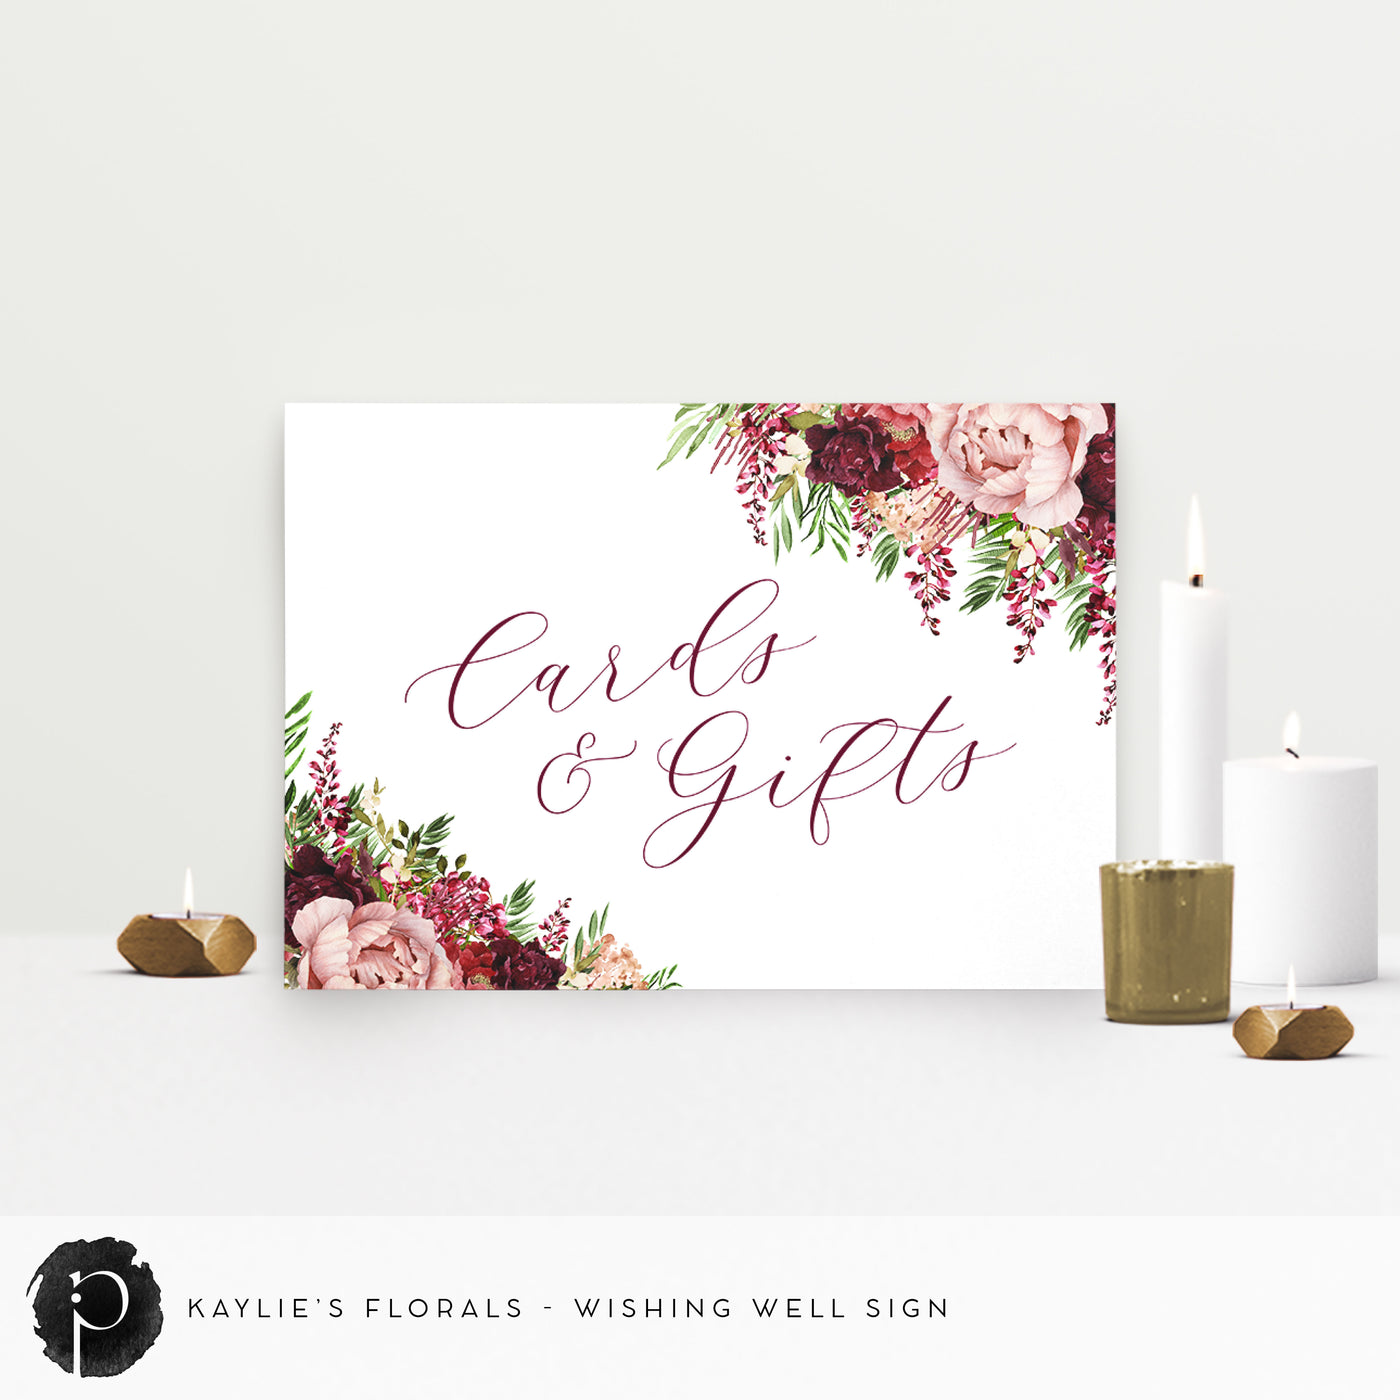 Kaylie's Florals - Cards/Gifts/Presents/Wishing Well Table Sign